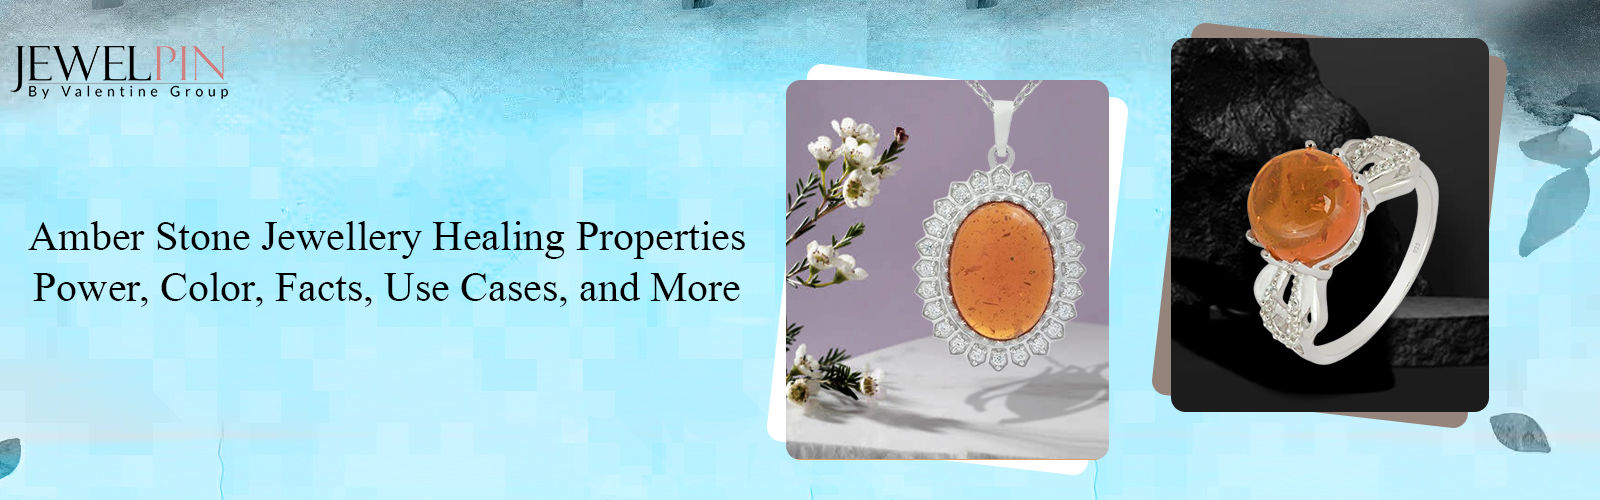 amber stone jewellery healing properties power color facts use cases and more